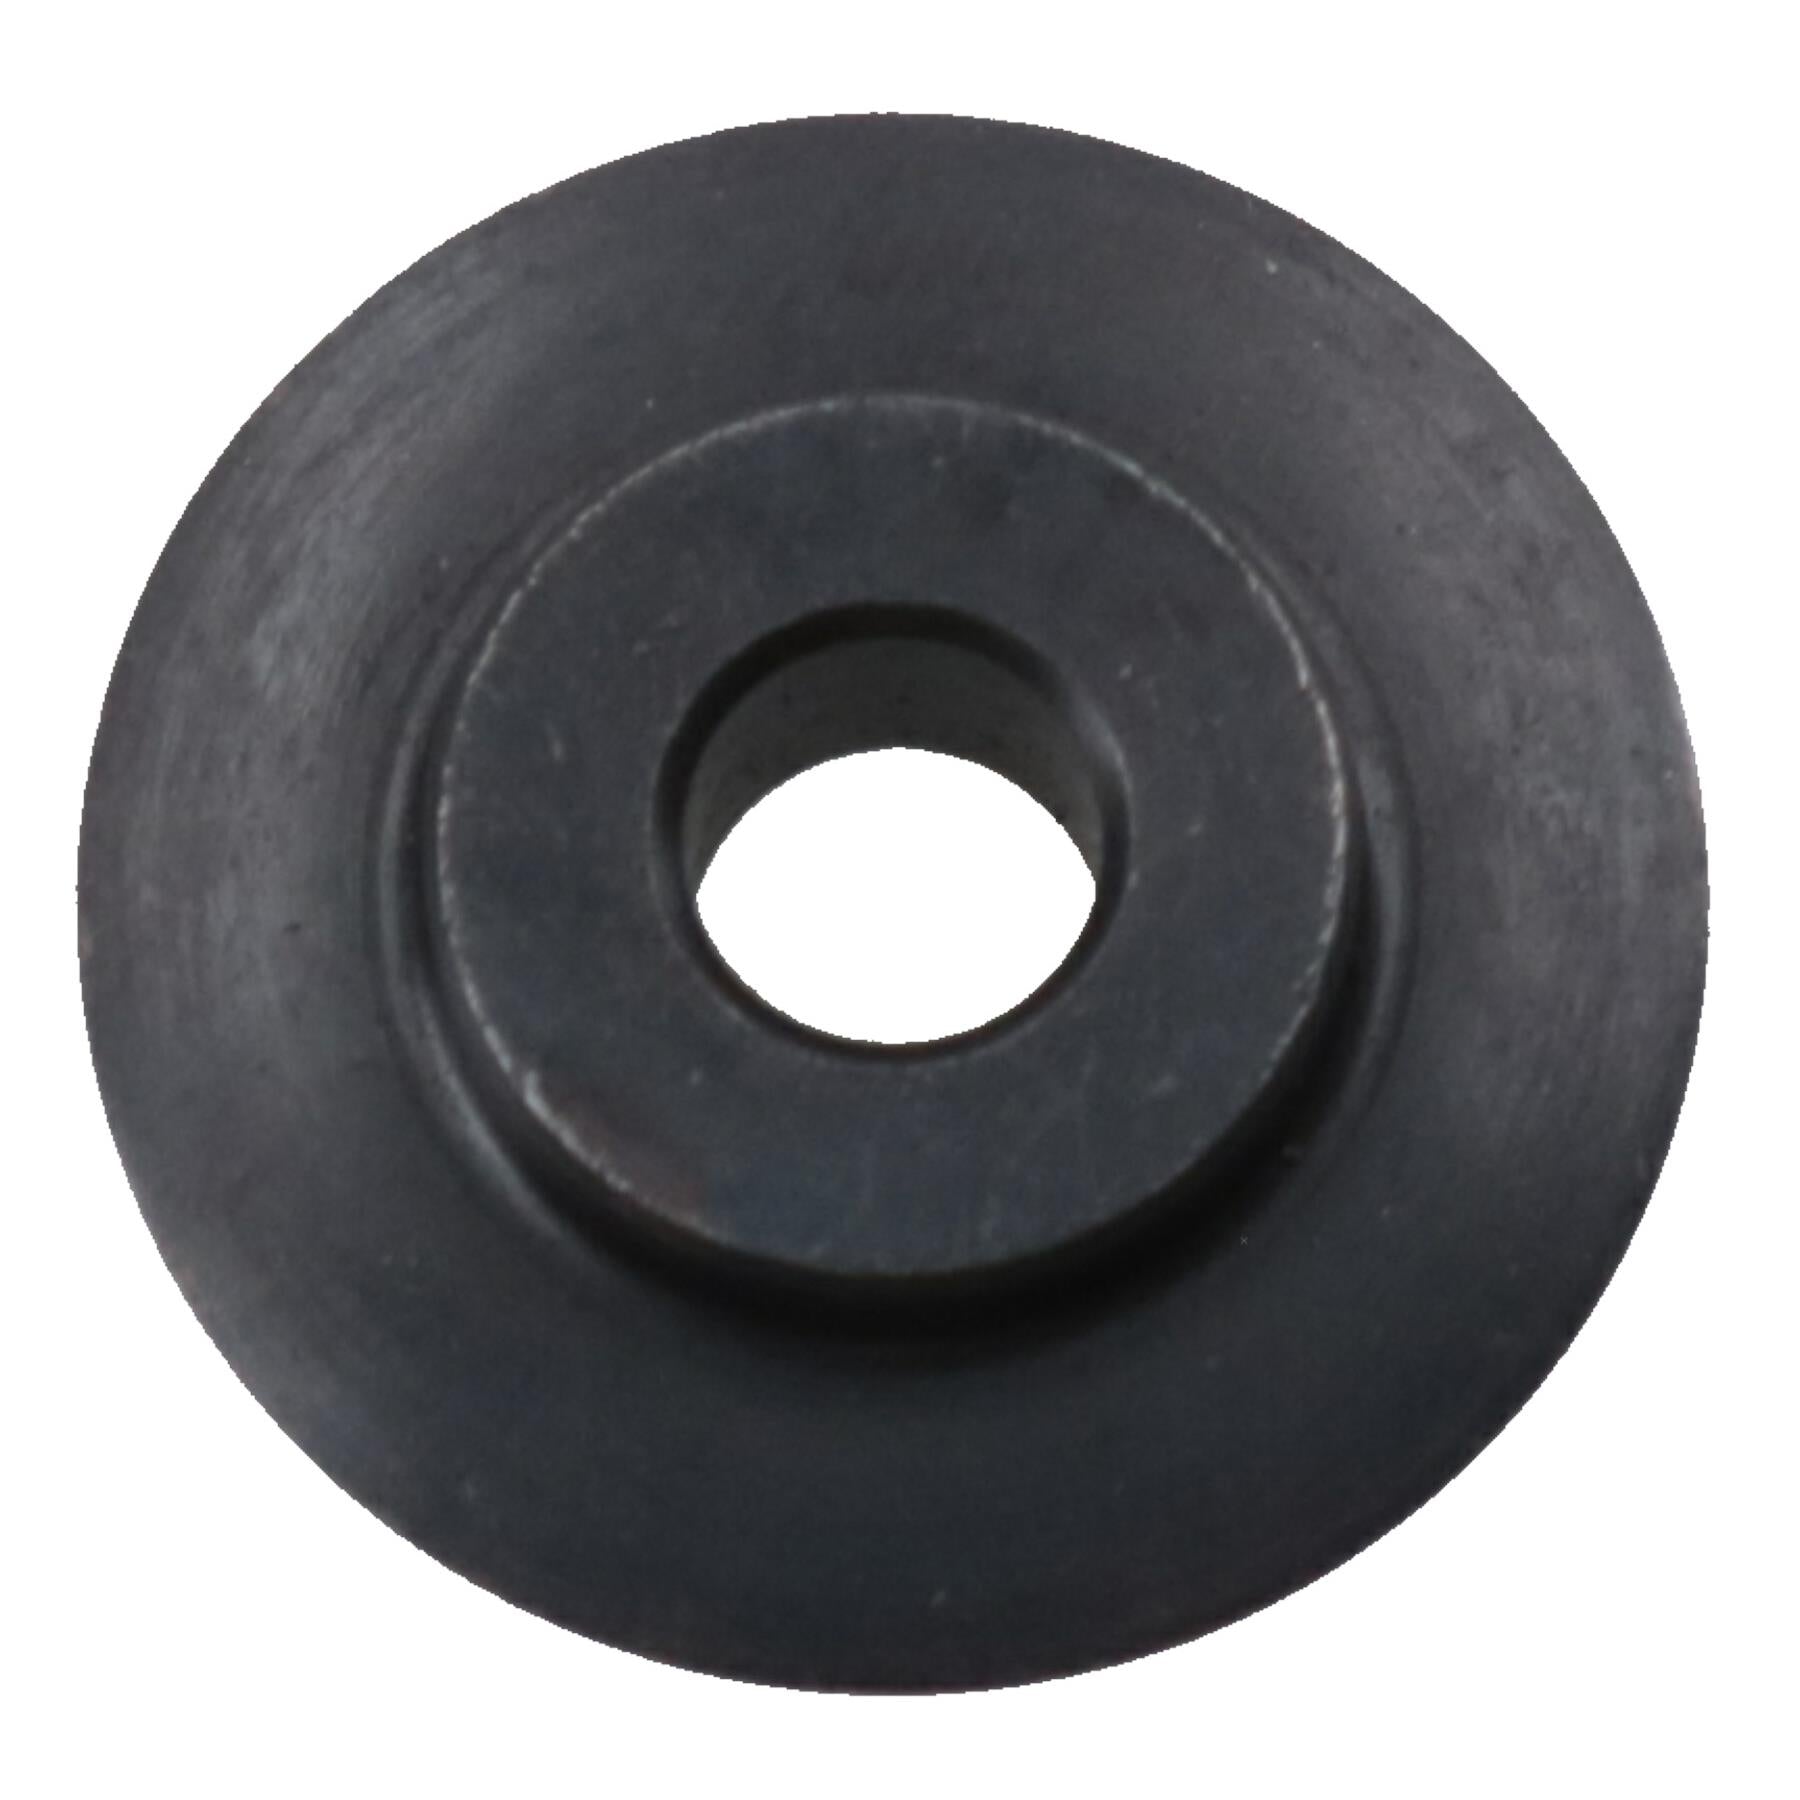 Replacement Spare Cutting Wheel for Inox Tube NT4023 NT4028 NT4035 NT4067